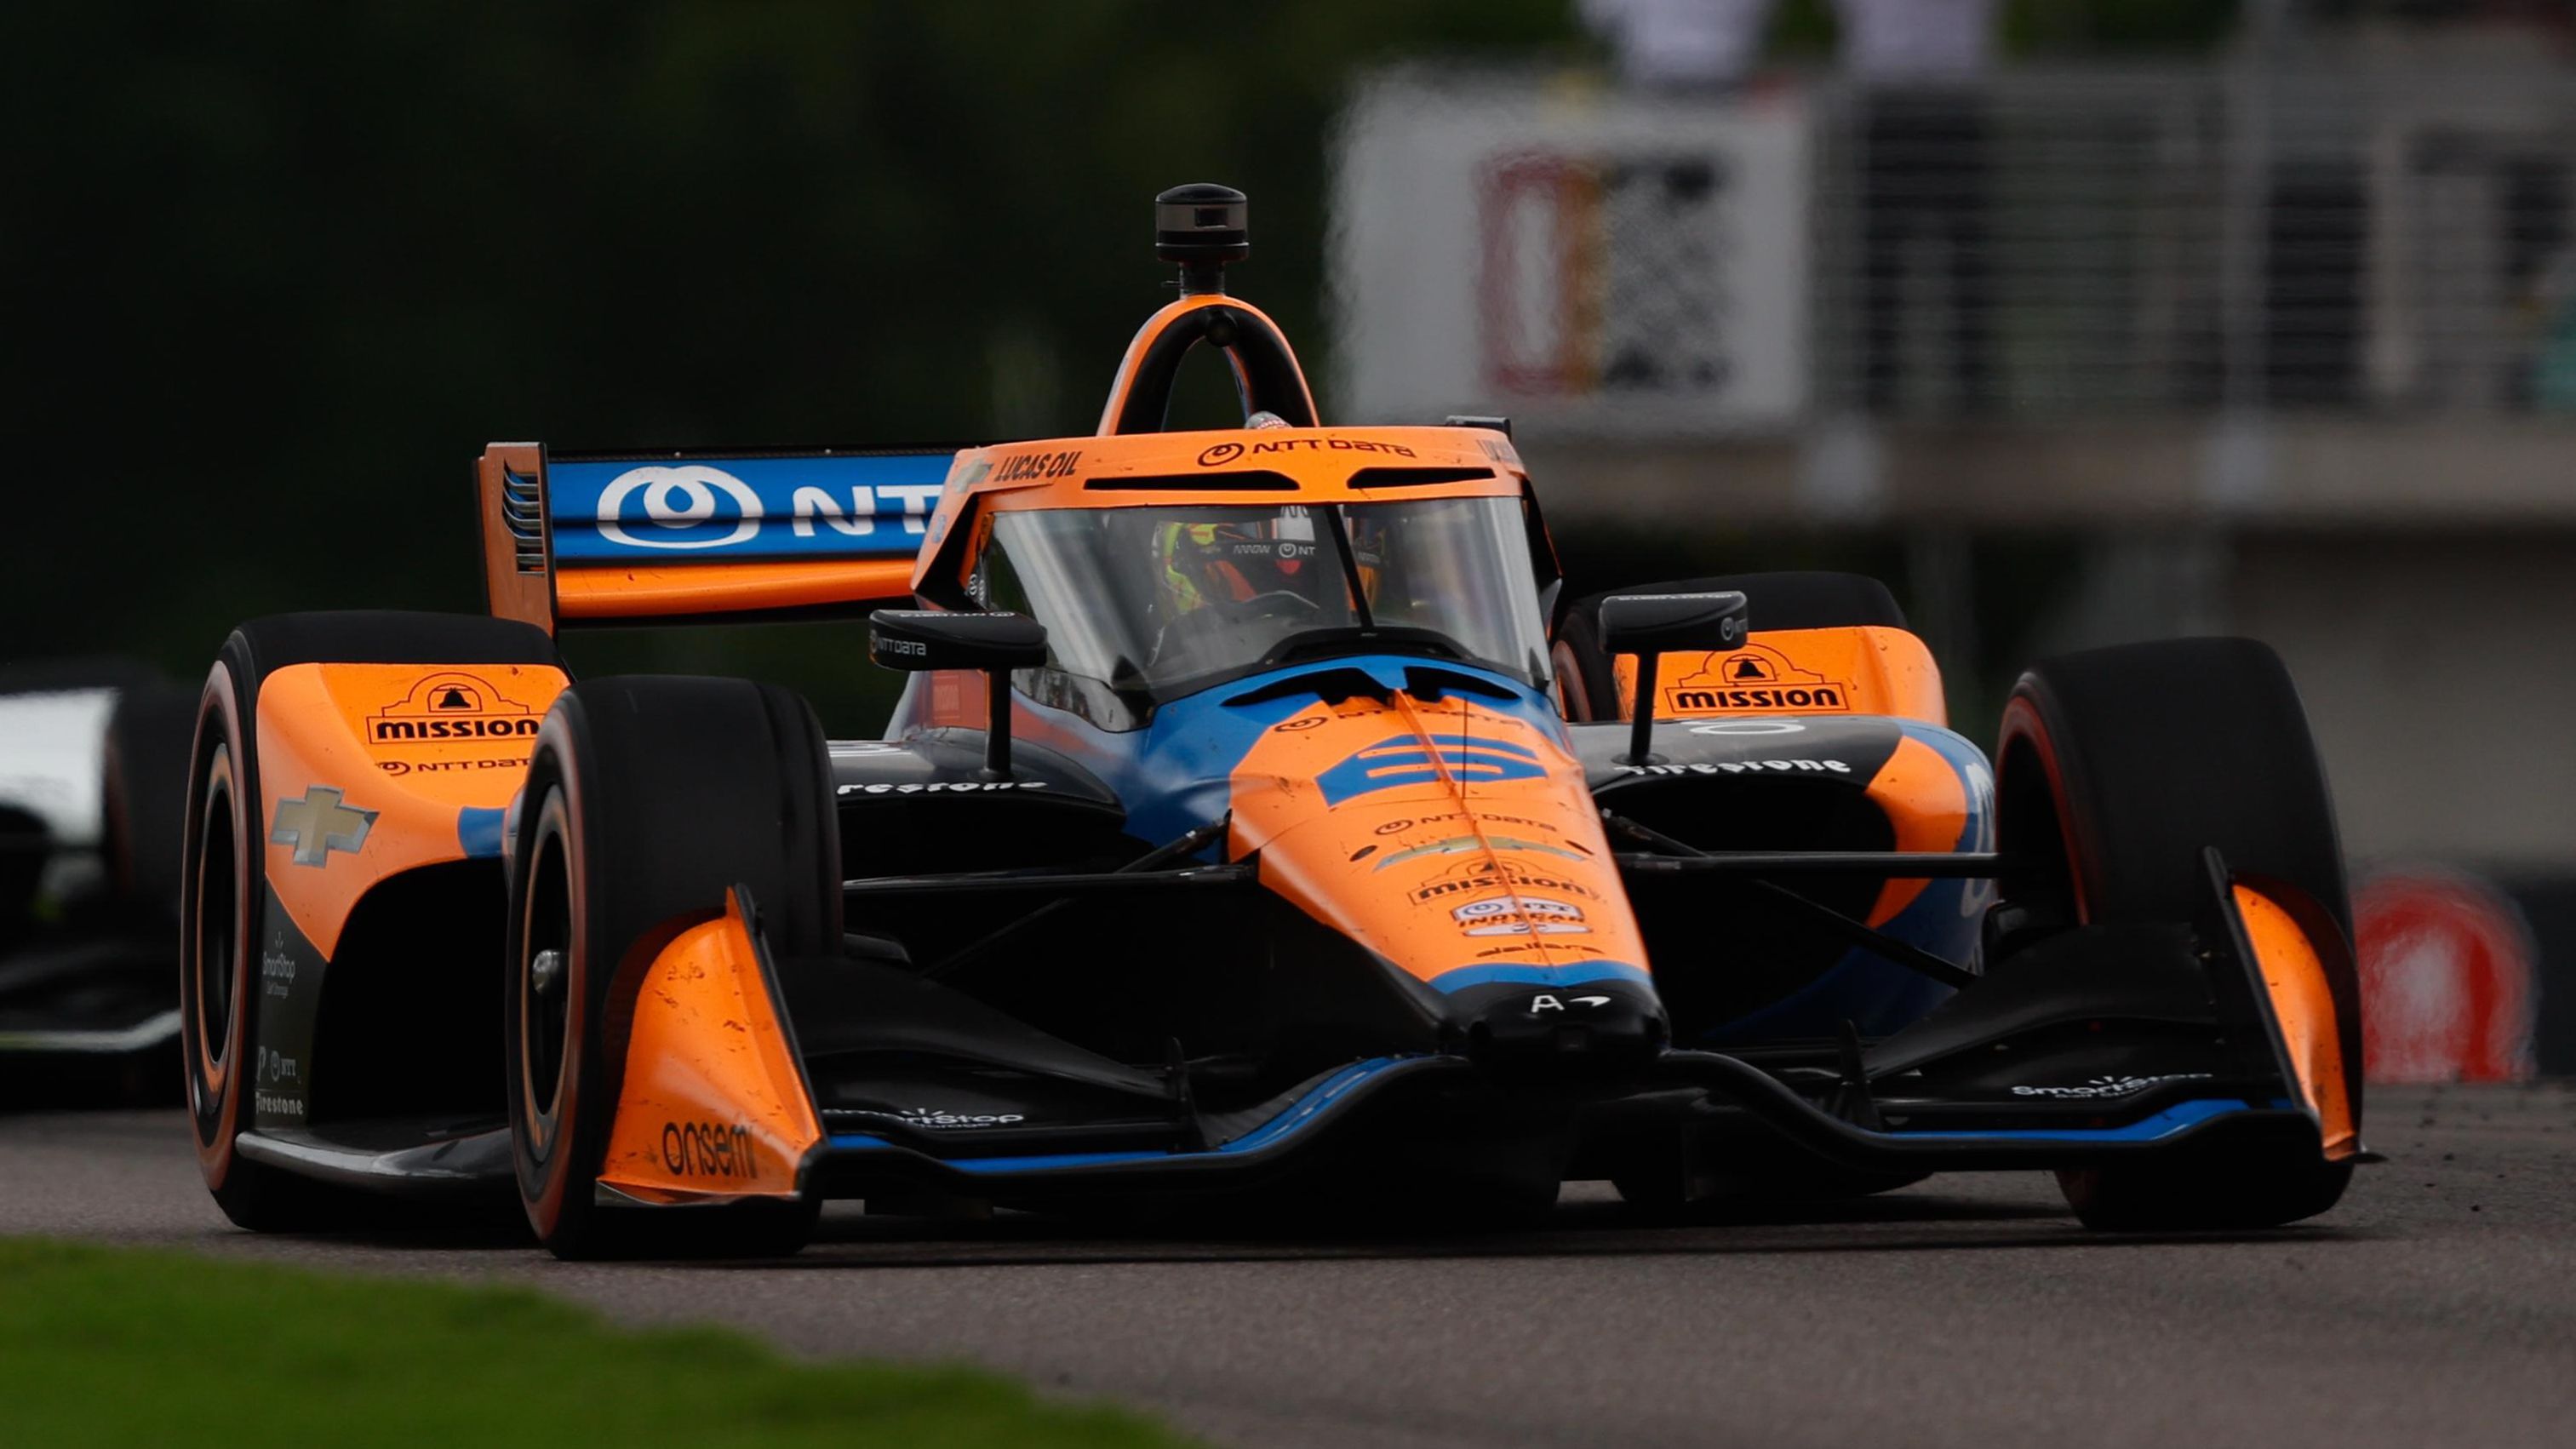 Theo Pourchaire has driven the No.6 entry for McLaren in the absence of David Malukas.